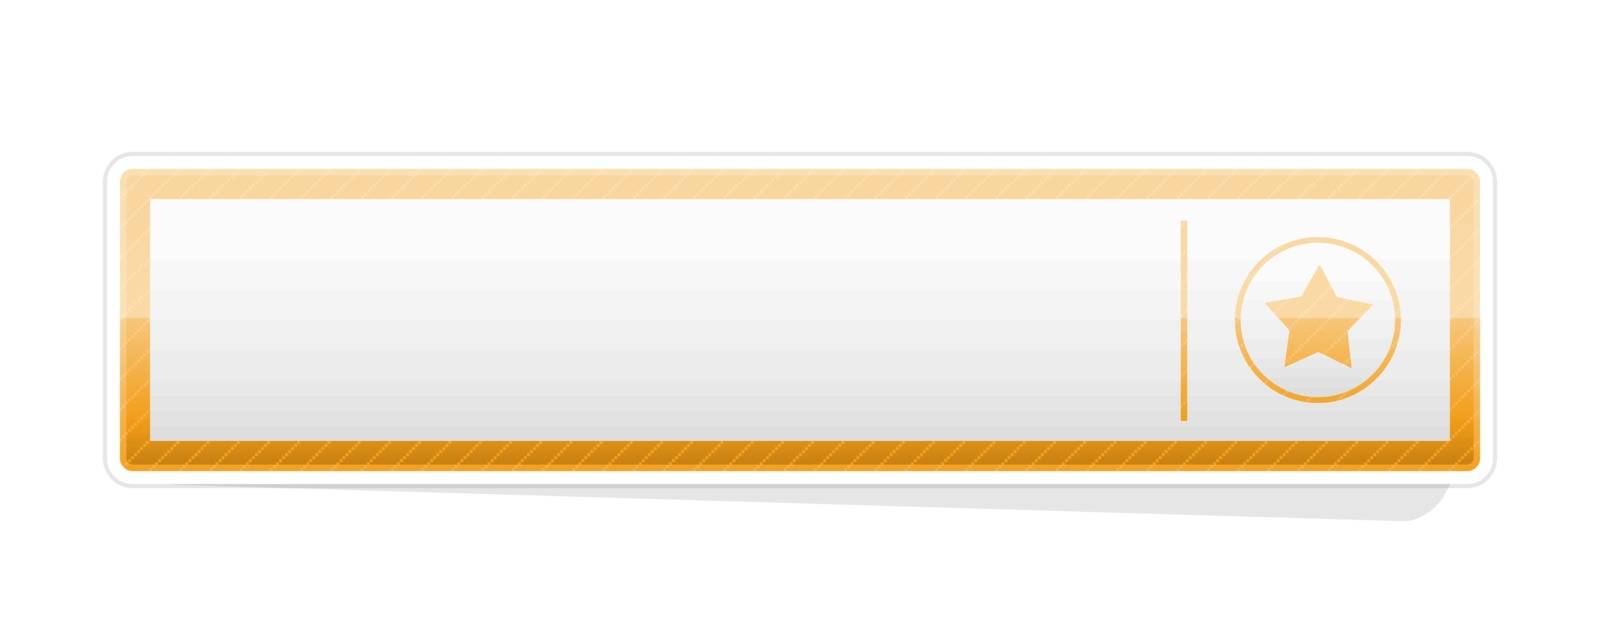 the illustration of blank orange rectangle button with star pictogram